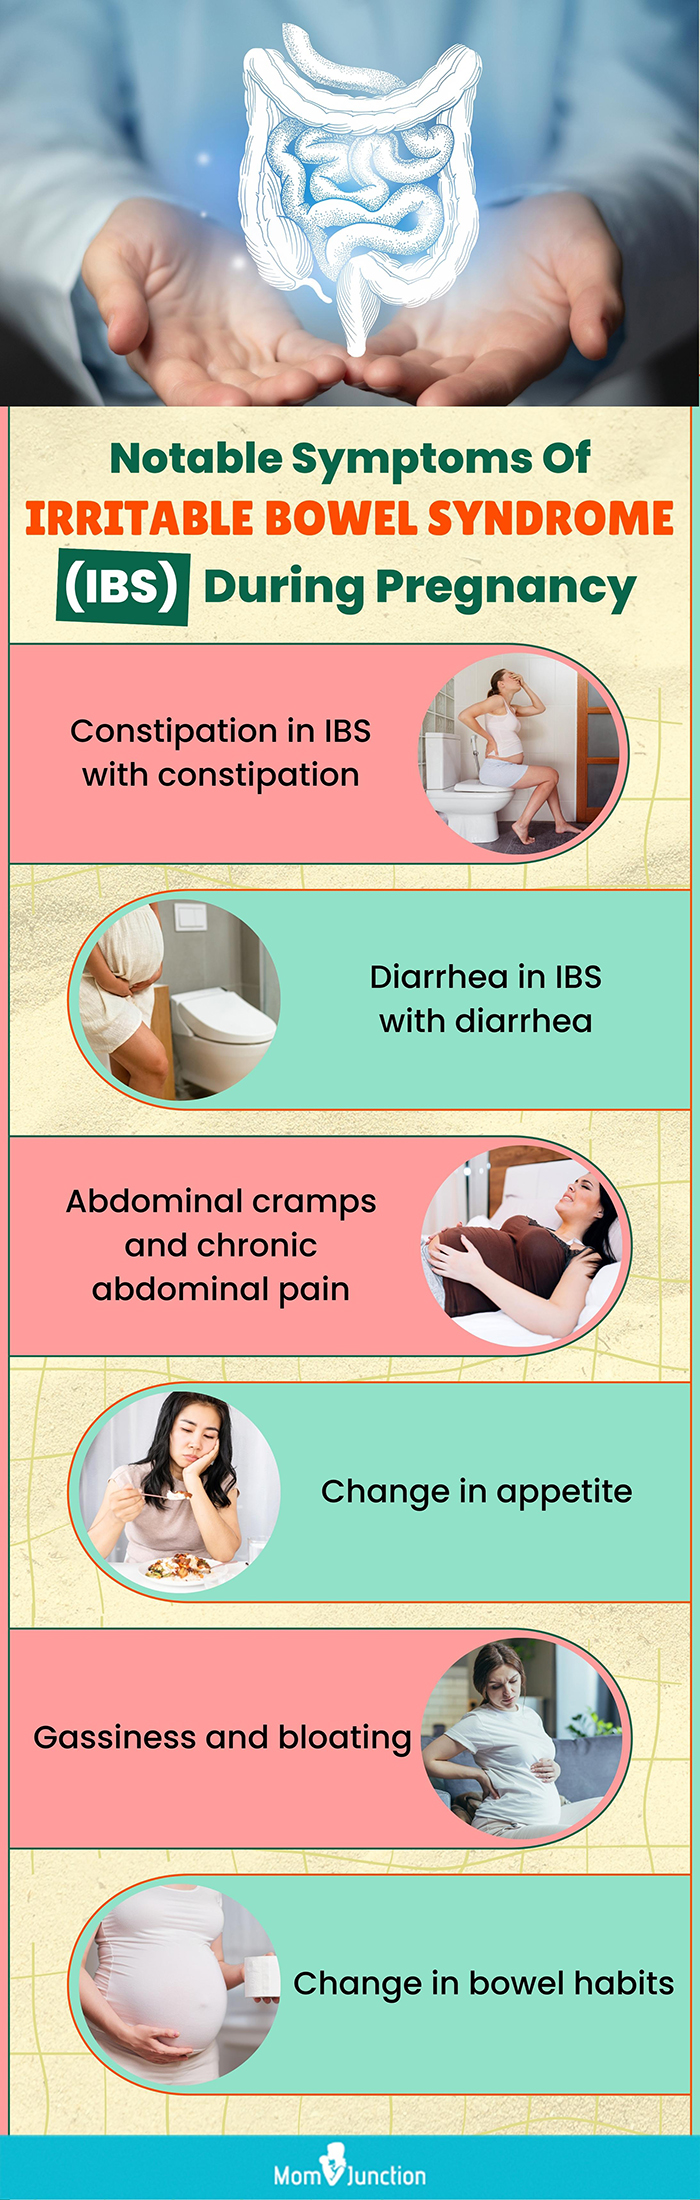 notable symptoms of irritable bowel syndrome (ibs) during pregnancy(infographic)